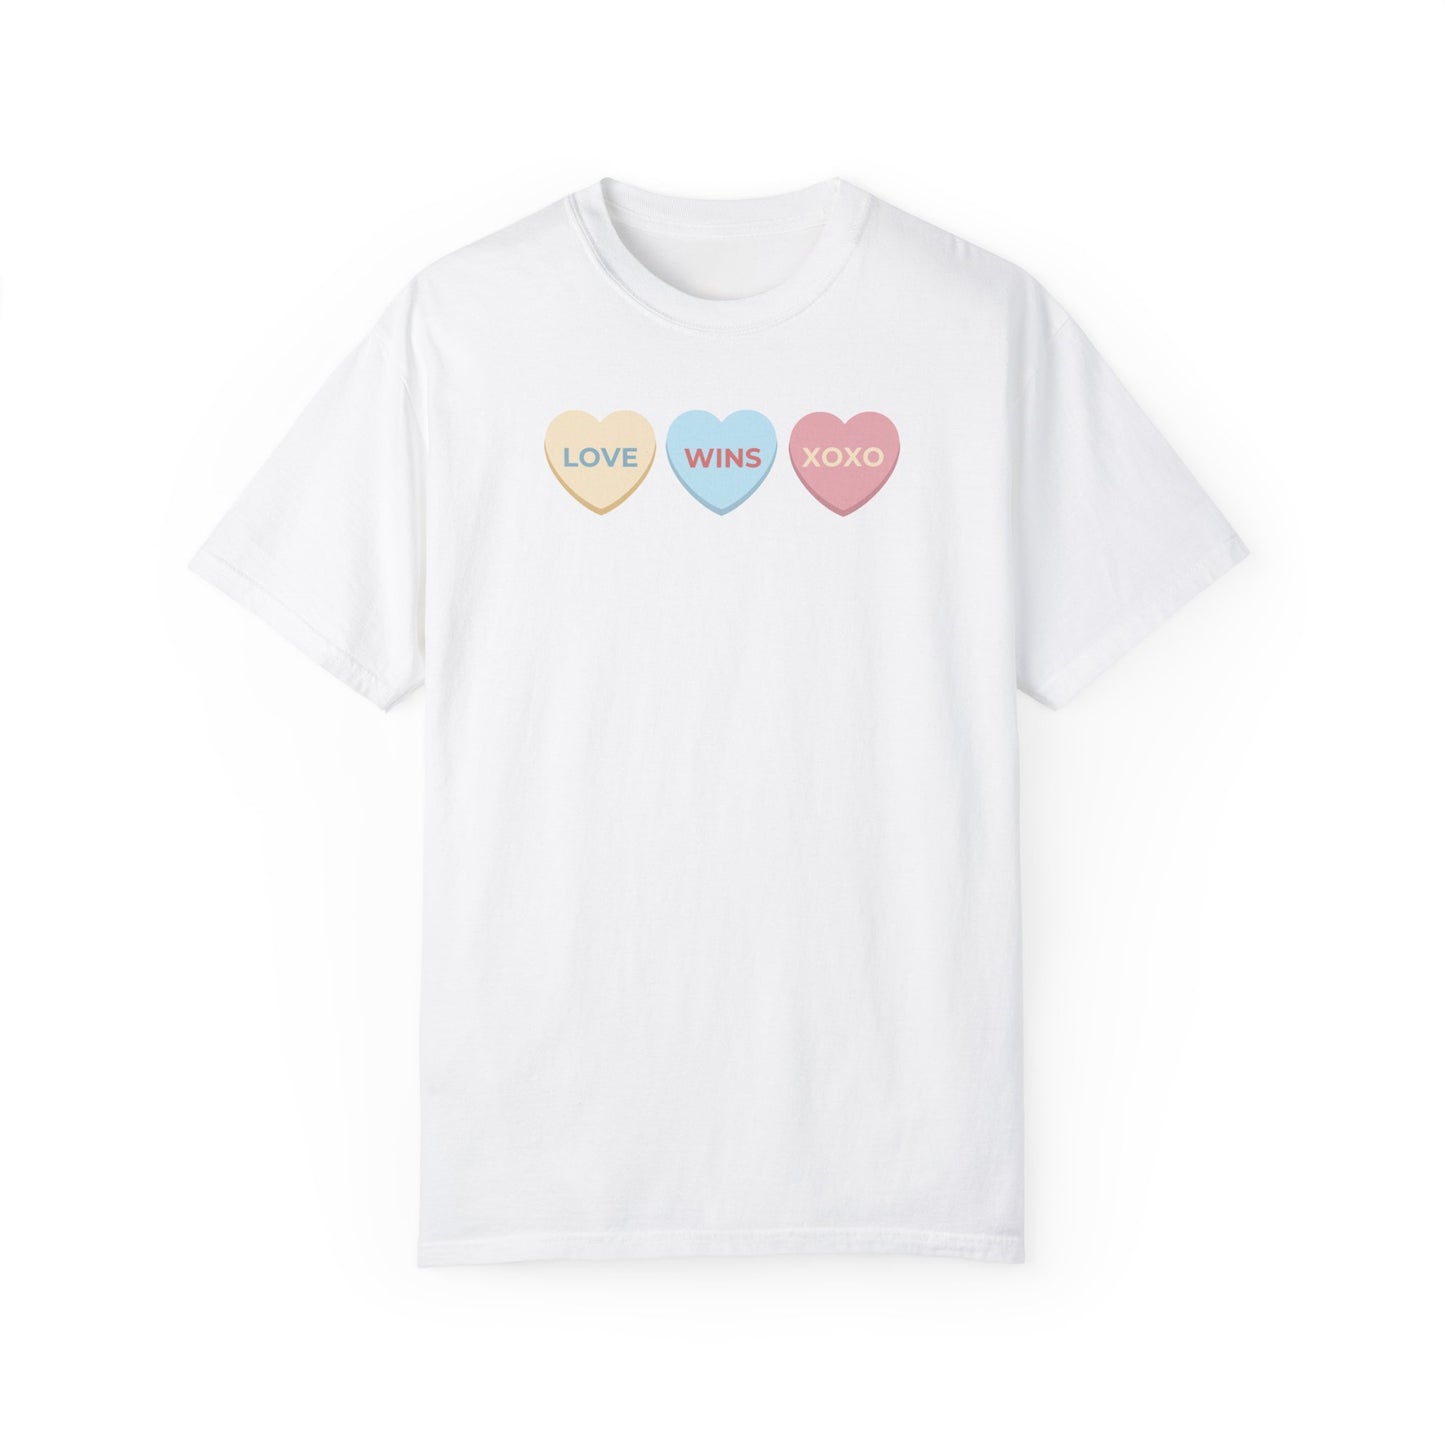 Love Wins Always T-Shirt XOXO Love You Hearts Candy Shirt Oversize Shirt Teen Preppy Cute Tee Valentine's Day Gift for Her Best Friend Mom